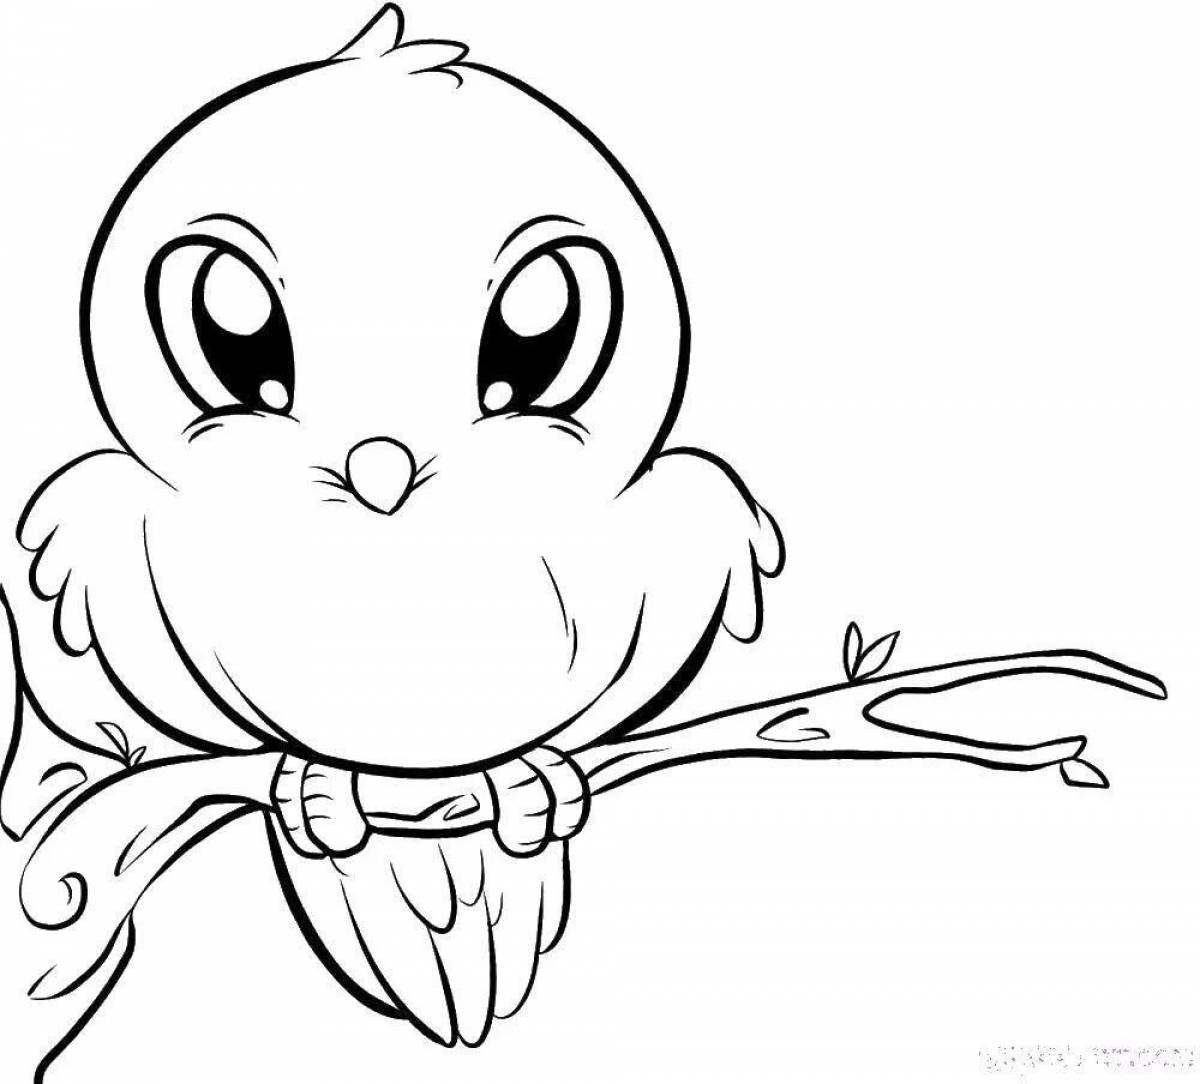 Fascinating bird coloring book for girls